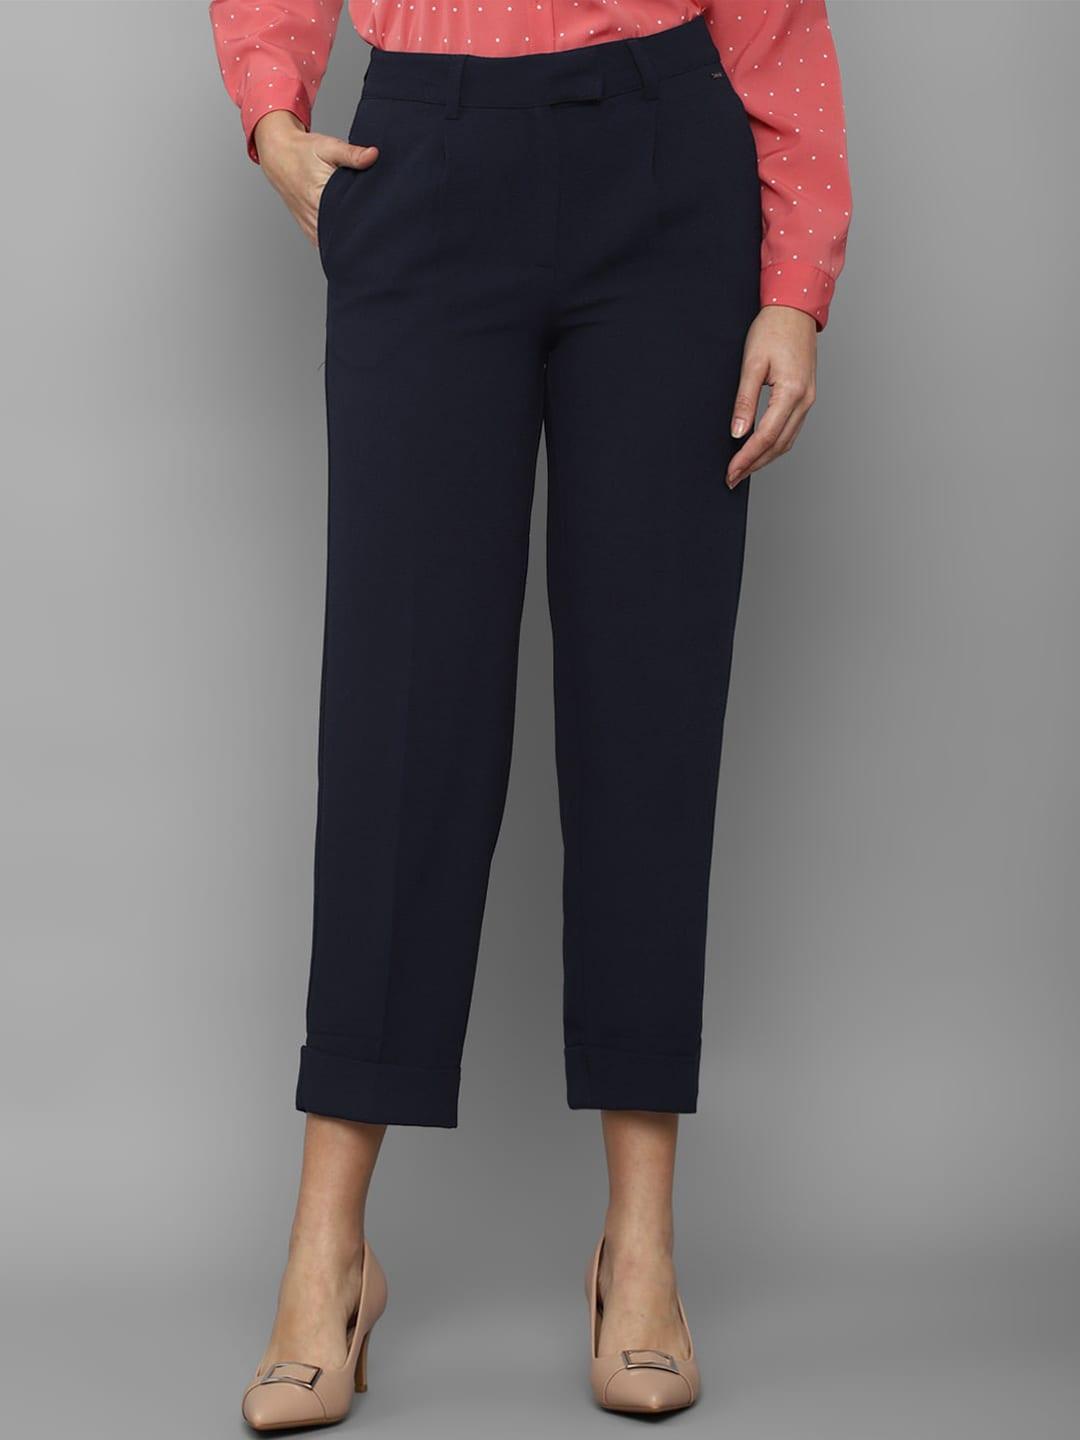 allen-solly-woman-navy-blue-pleated-trousers